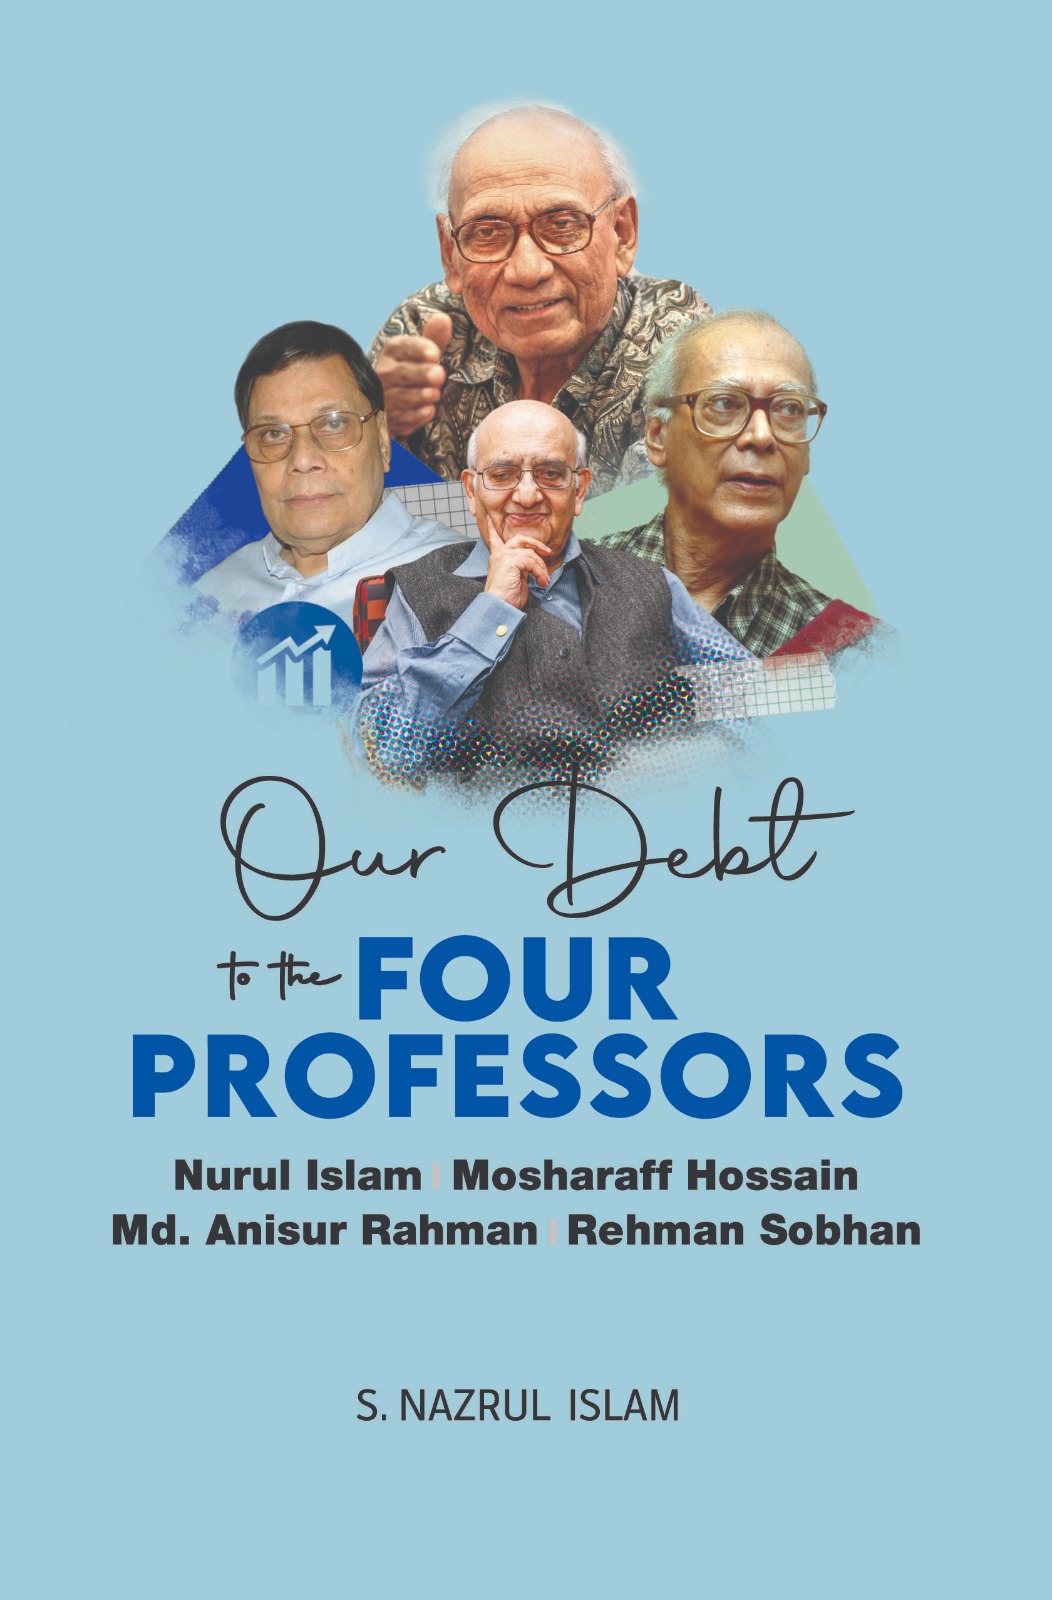 Our Debt to the Four Professors (হার্ডকভার)